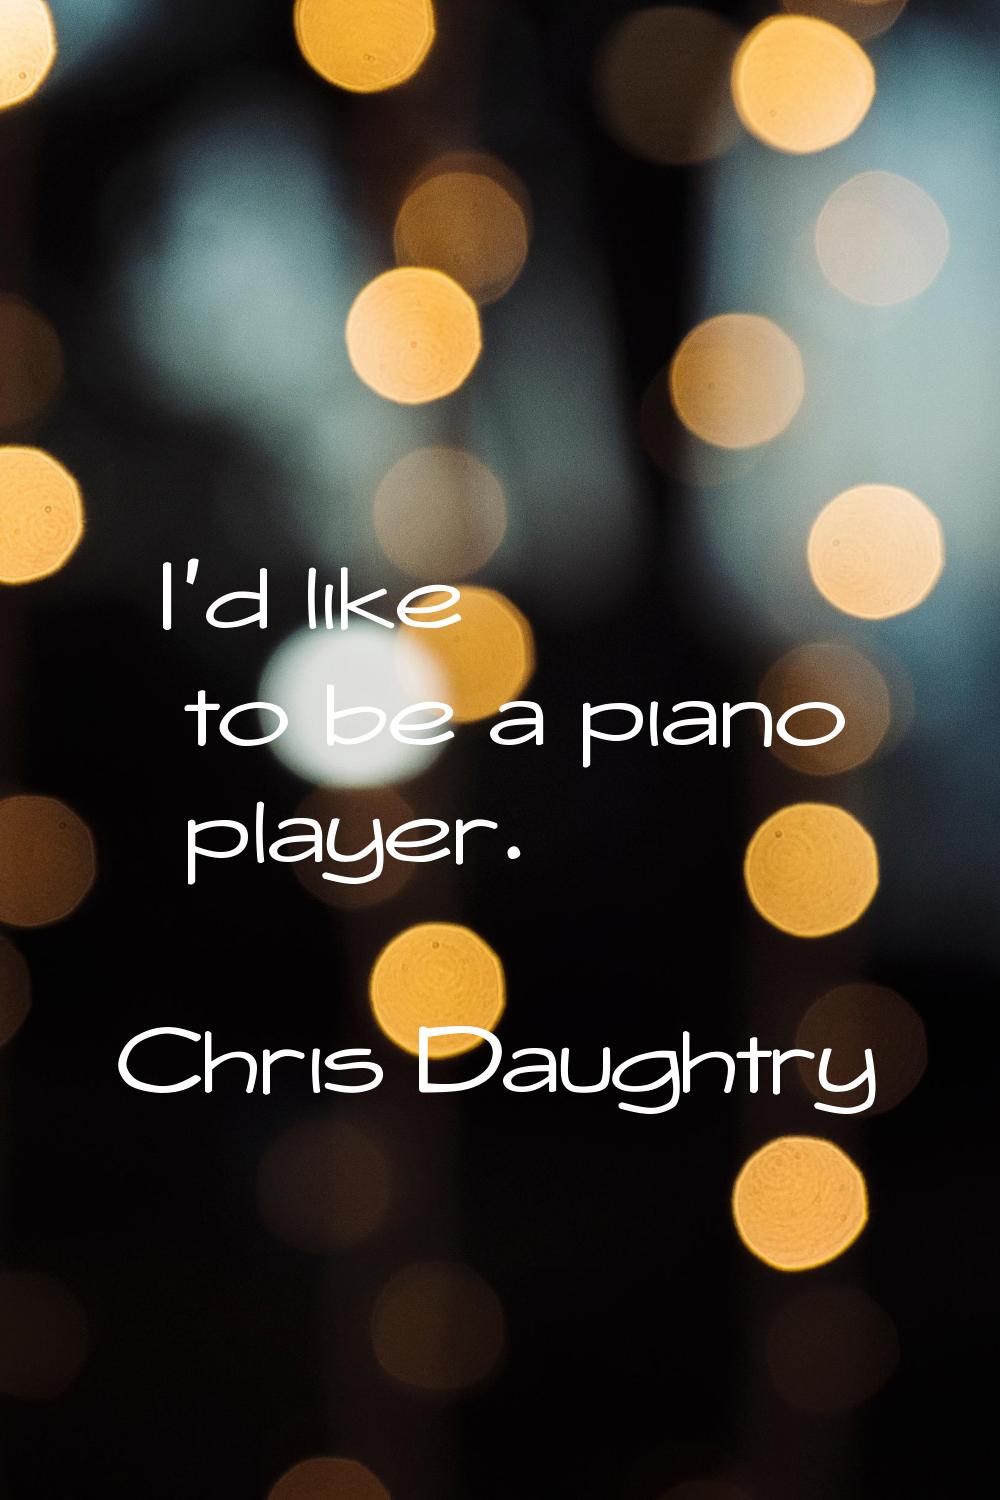 I'd like to be a piano player.